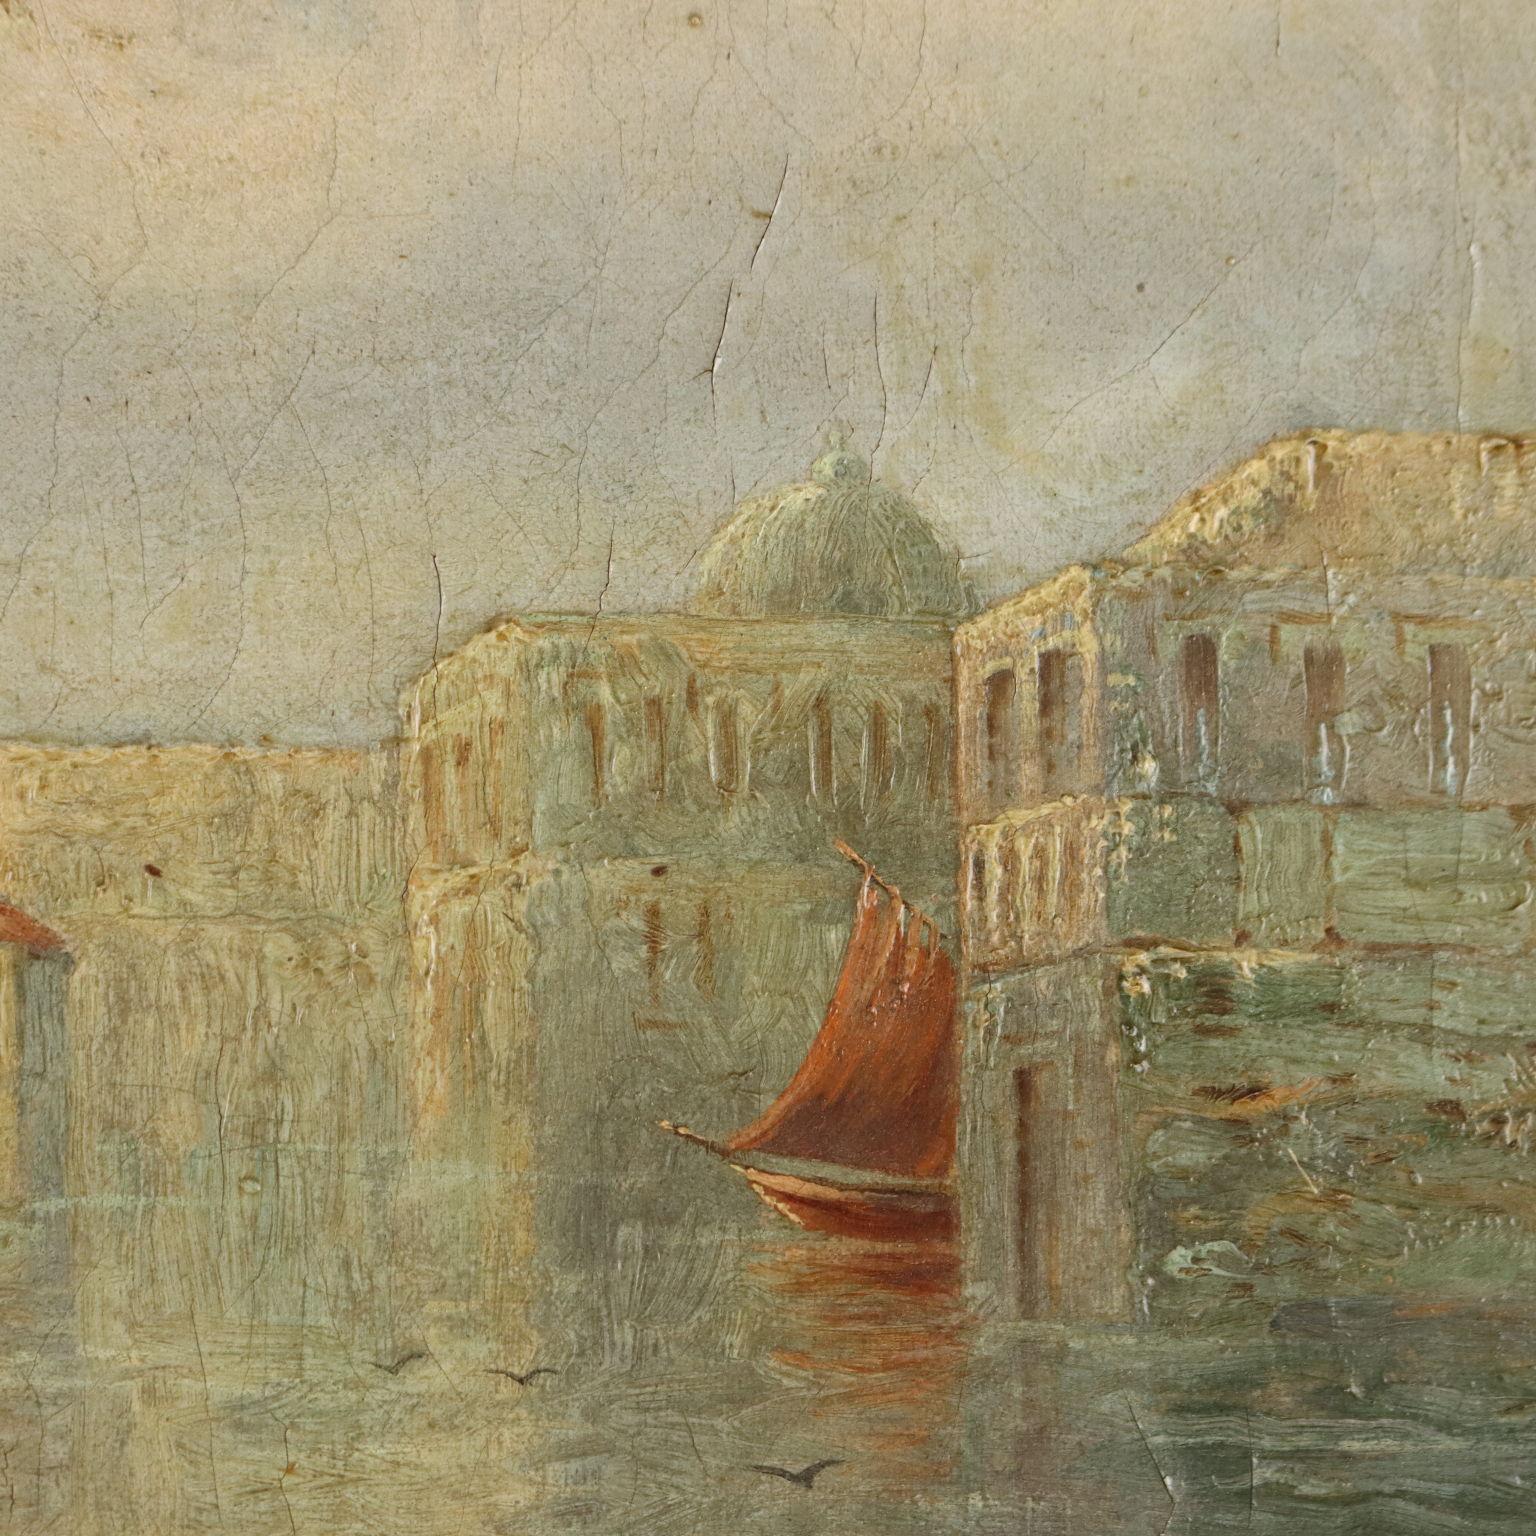 Oil on Canvas. Signed lower right.
Several Venetian views are known of this English artist, with views of the Grand Canal populated by small boats with triangular orange sails; pastel, delicate and bright hues prevail, 
The work is presented in a